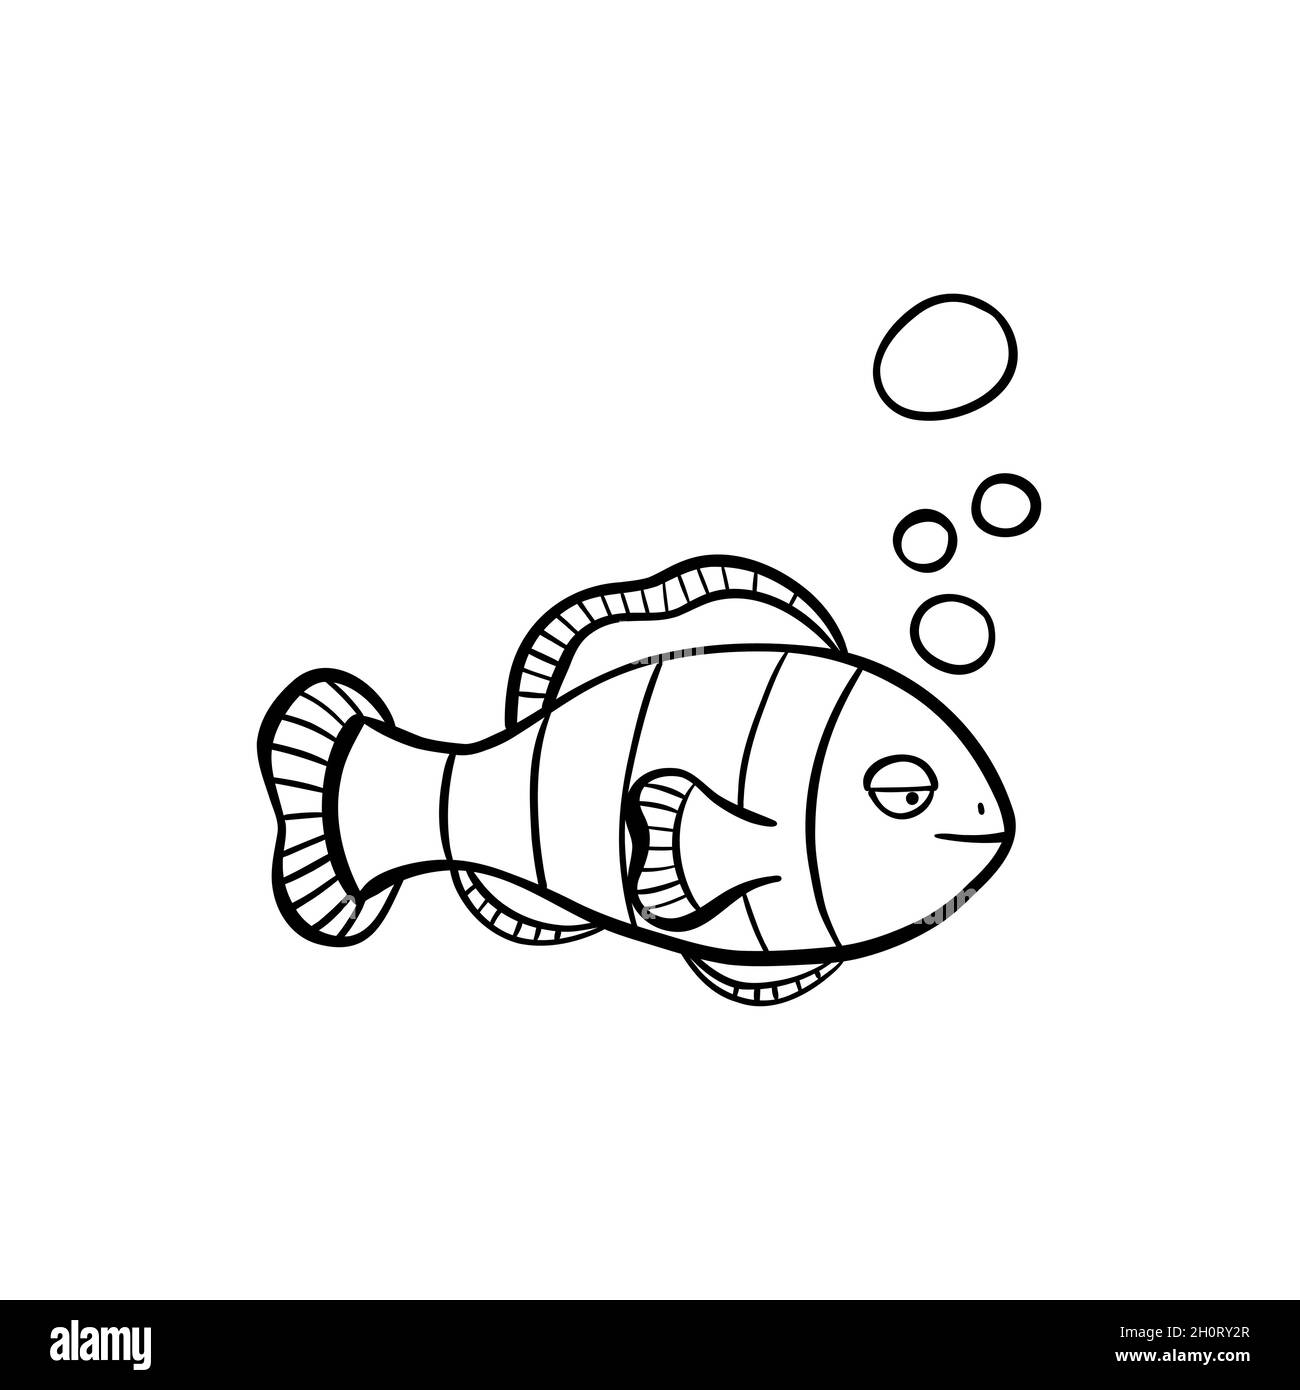 hand drawn clown fish illustration in doodle style Stock Vector